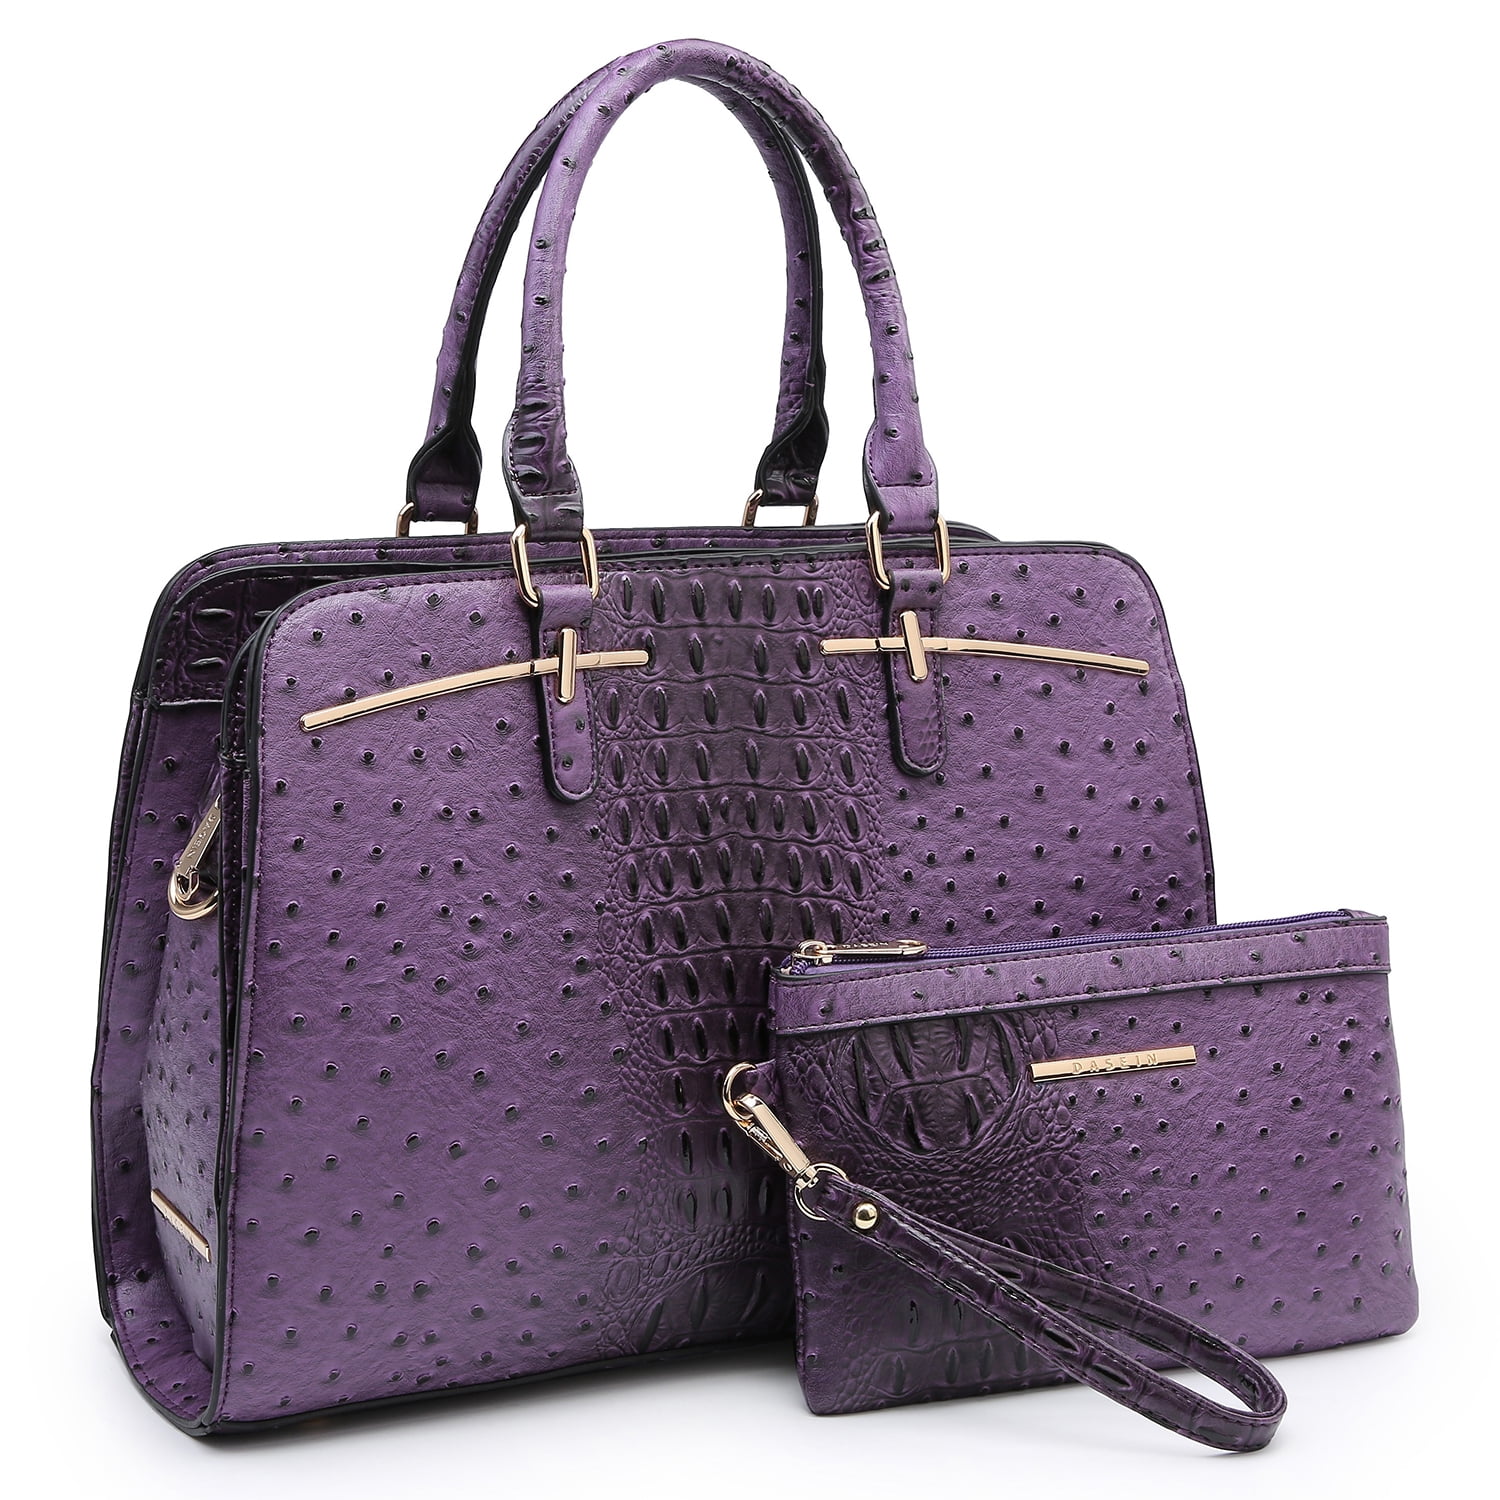 Good Brands For Women's Purses Made